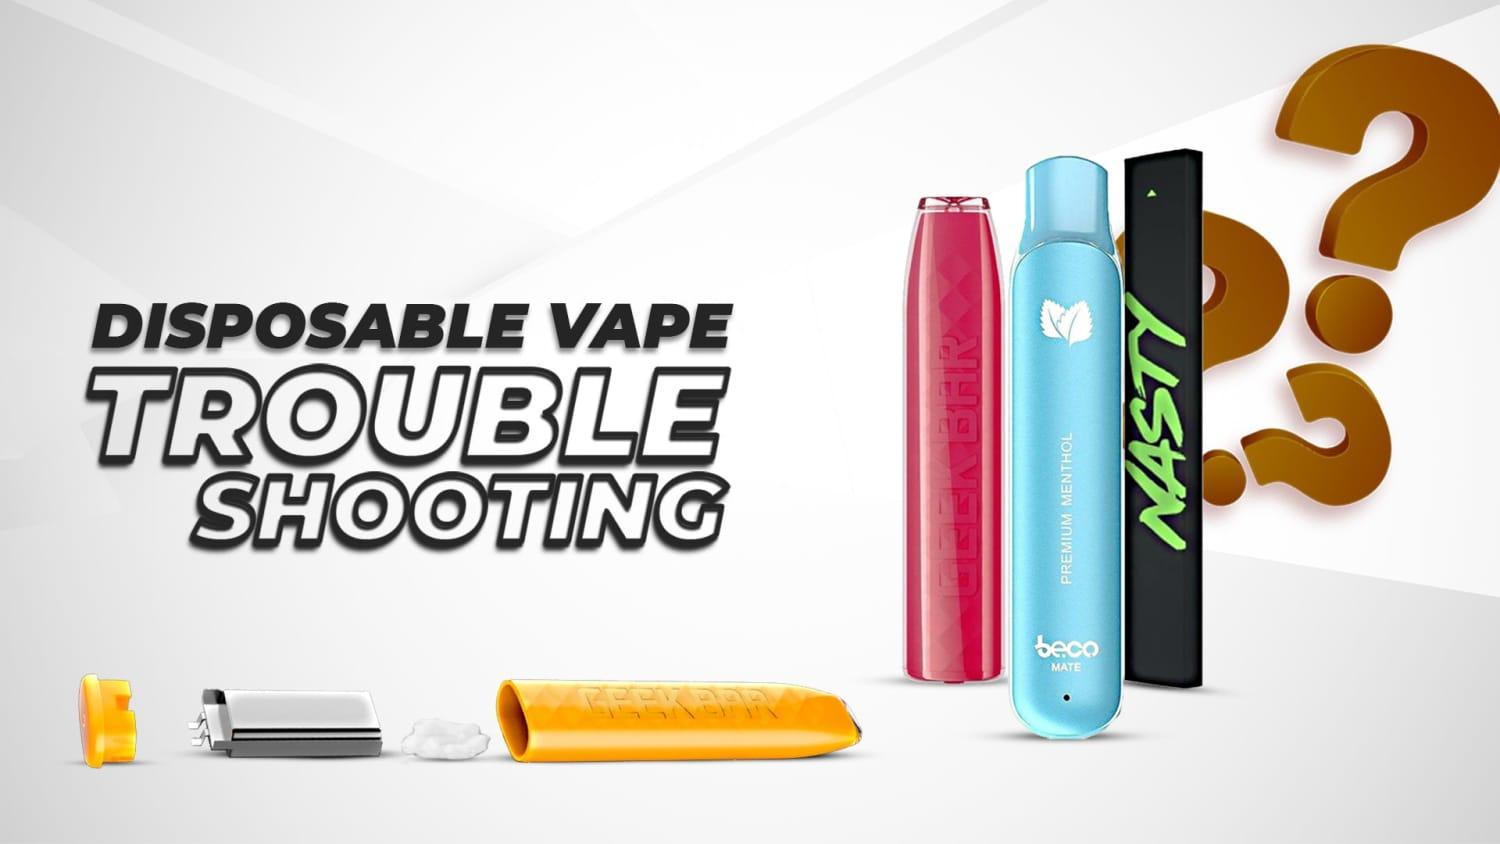 Disposable Vape FAQs and Troubleshooting - Category:Vape Kits, Sub Category:Disposables